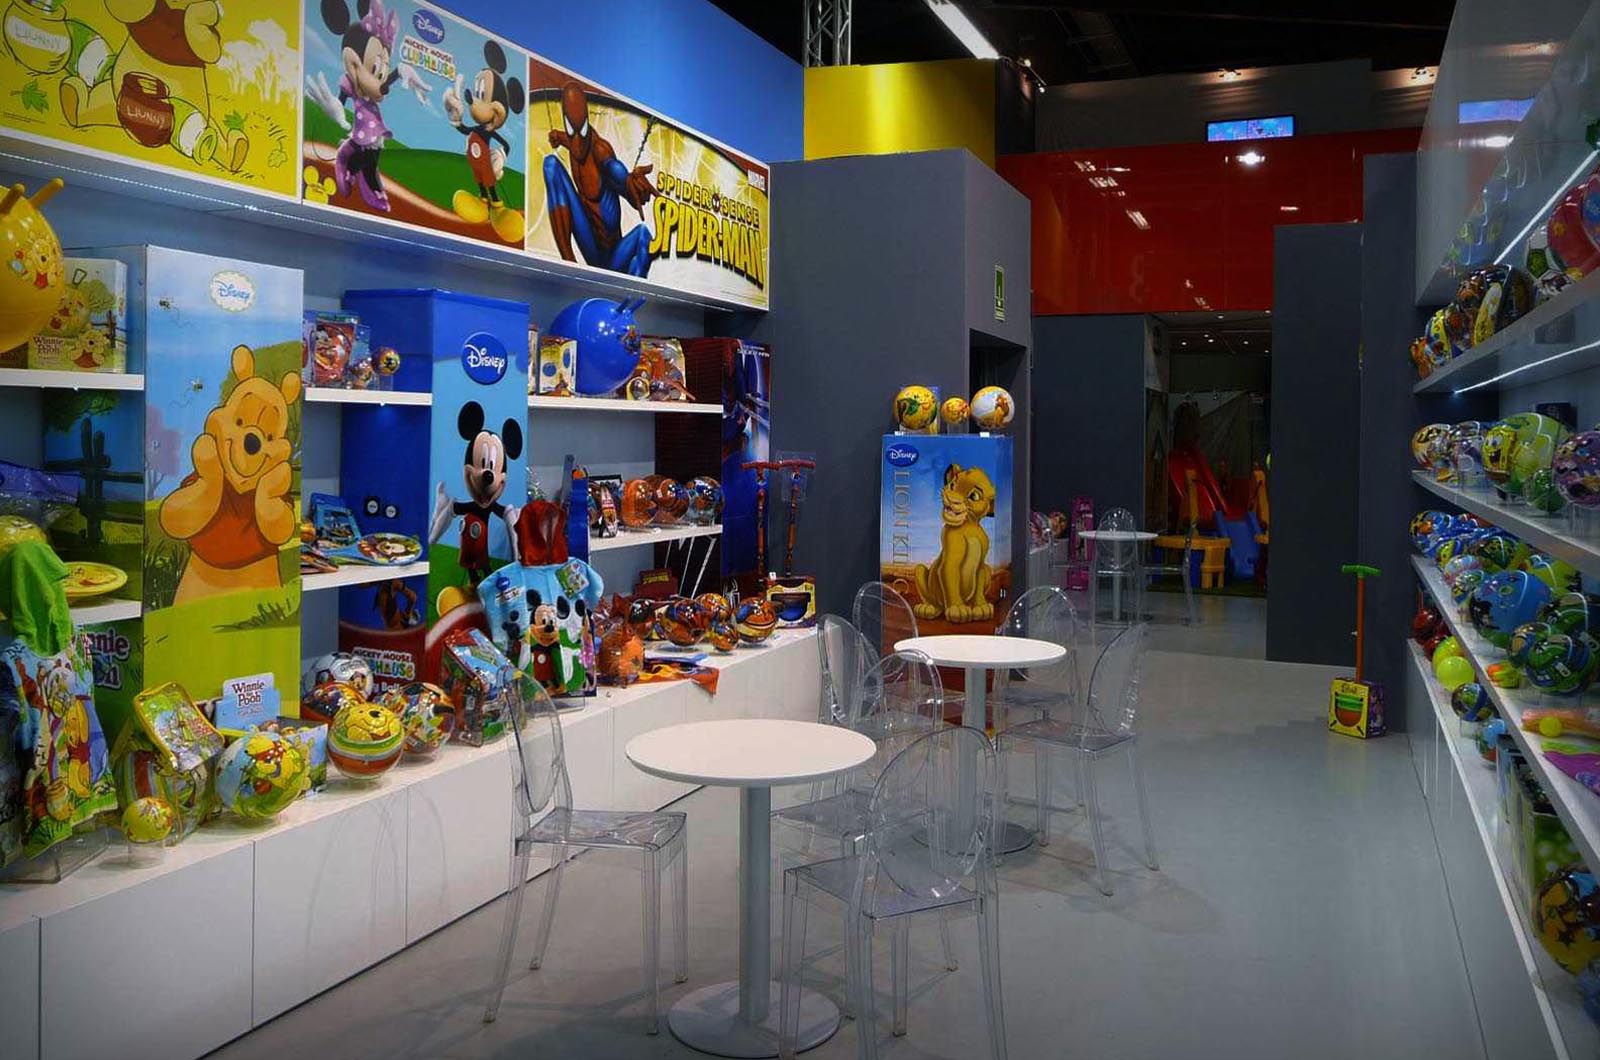 Trade shows & Expo - SpielwarenMesse